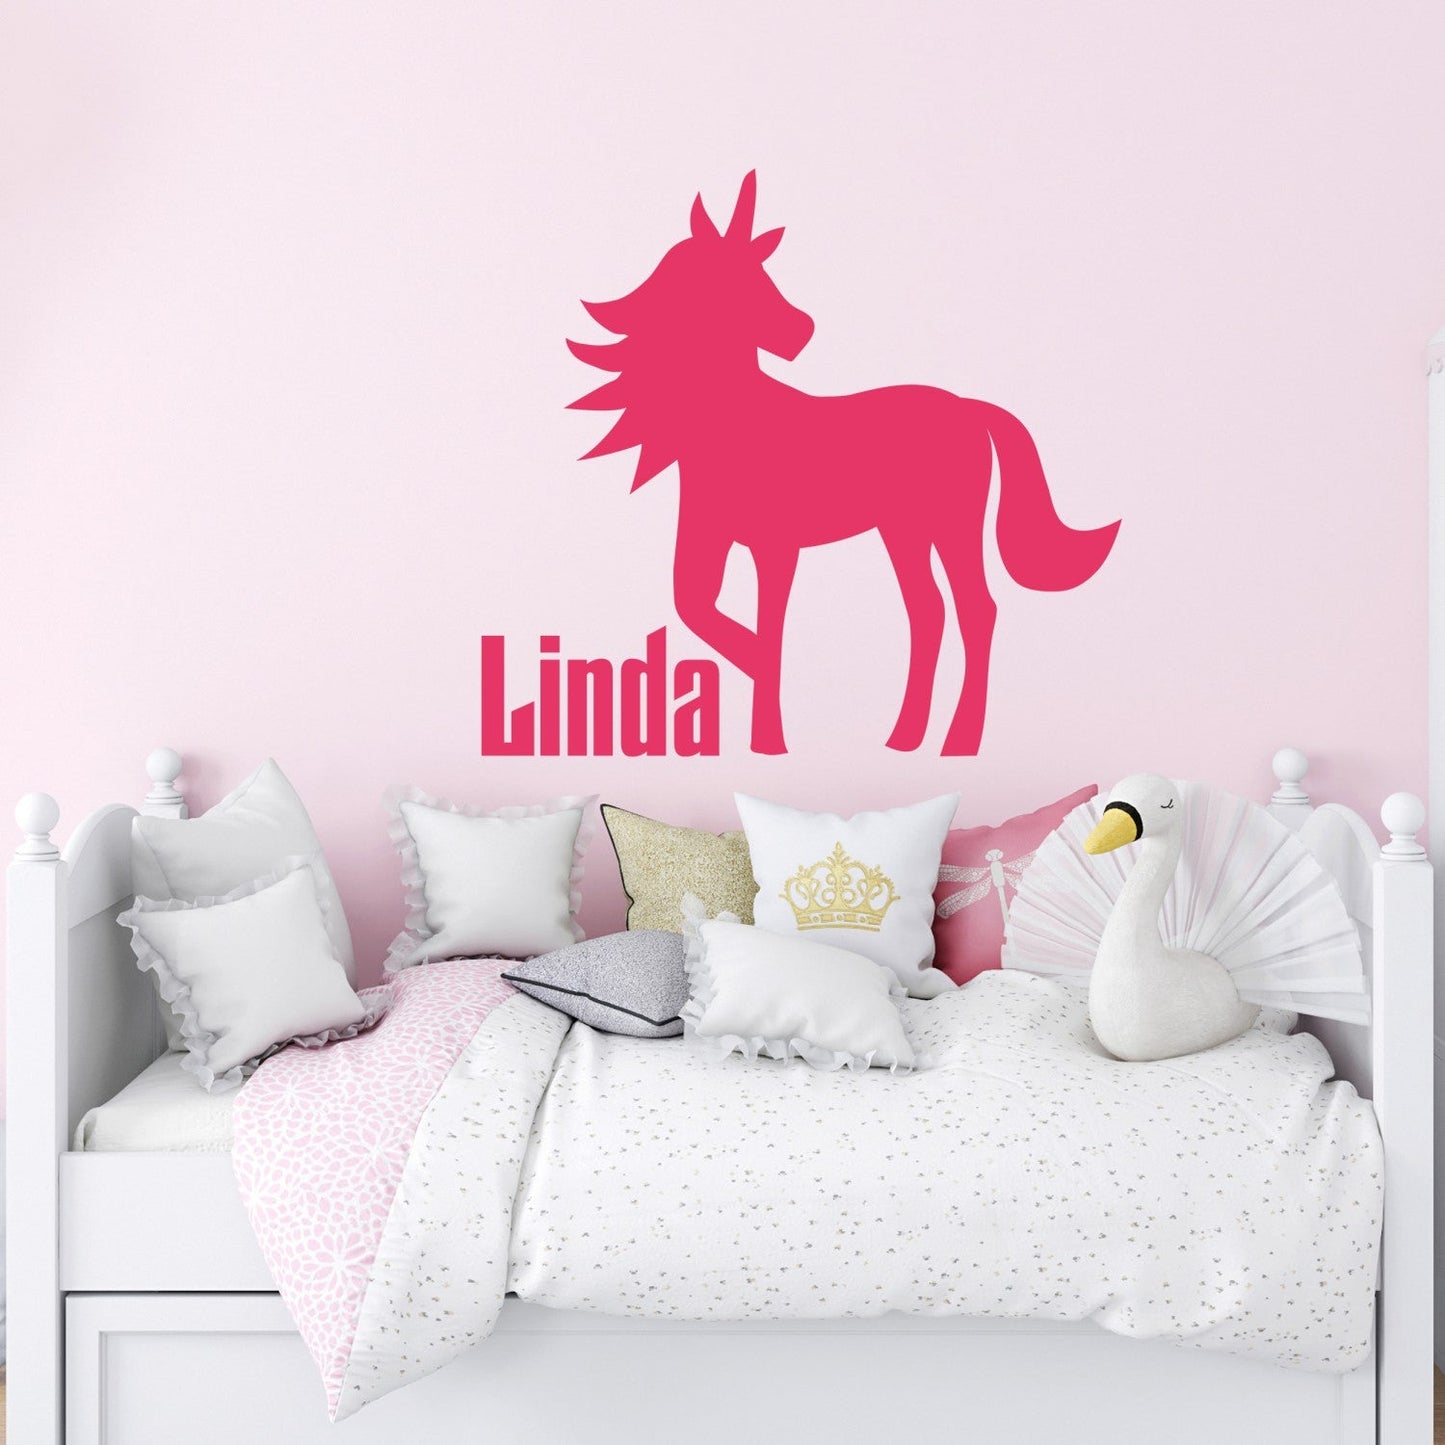 Customized Name with Unicorn Wall Decal - Personalized Vinyl Stickers Featuring Enchanting Unicorn Imagery - Transform Kid's Room with Personalized Unicorn Name Wall Decal